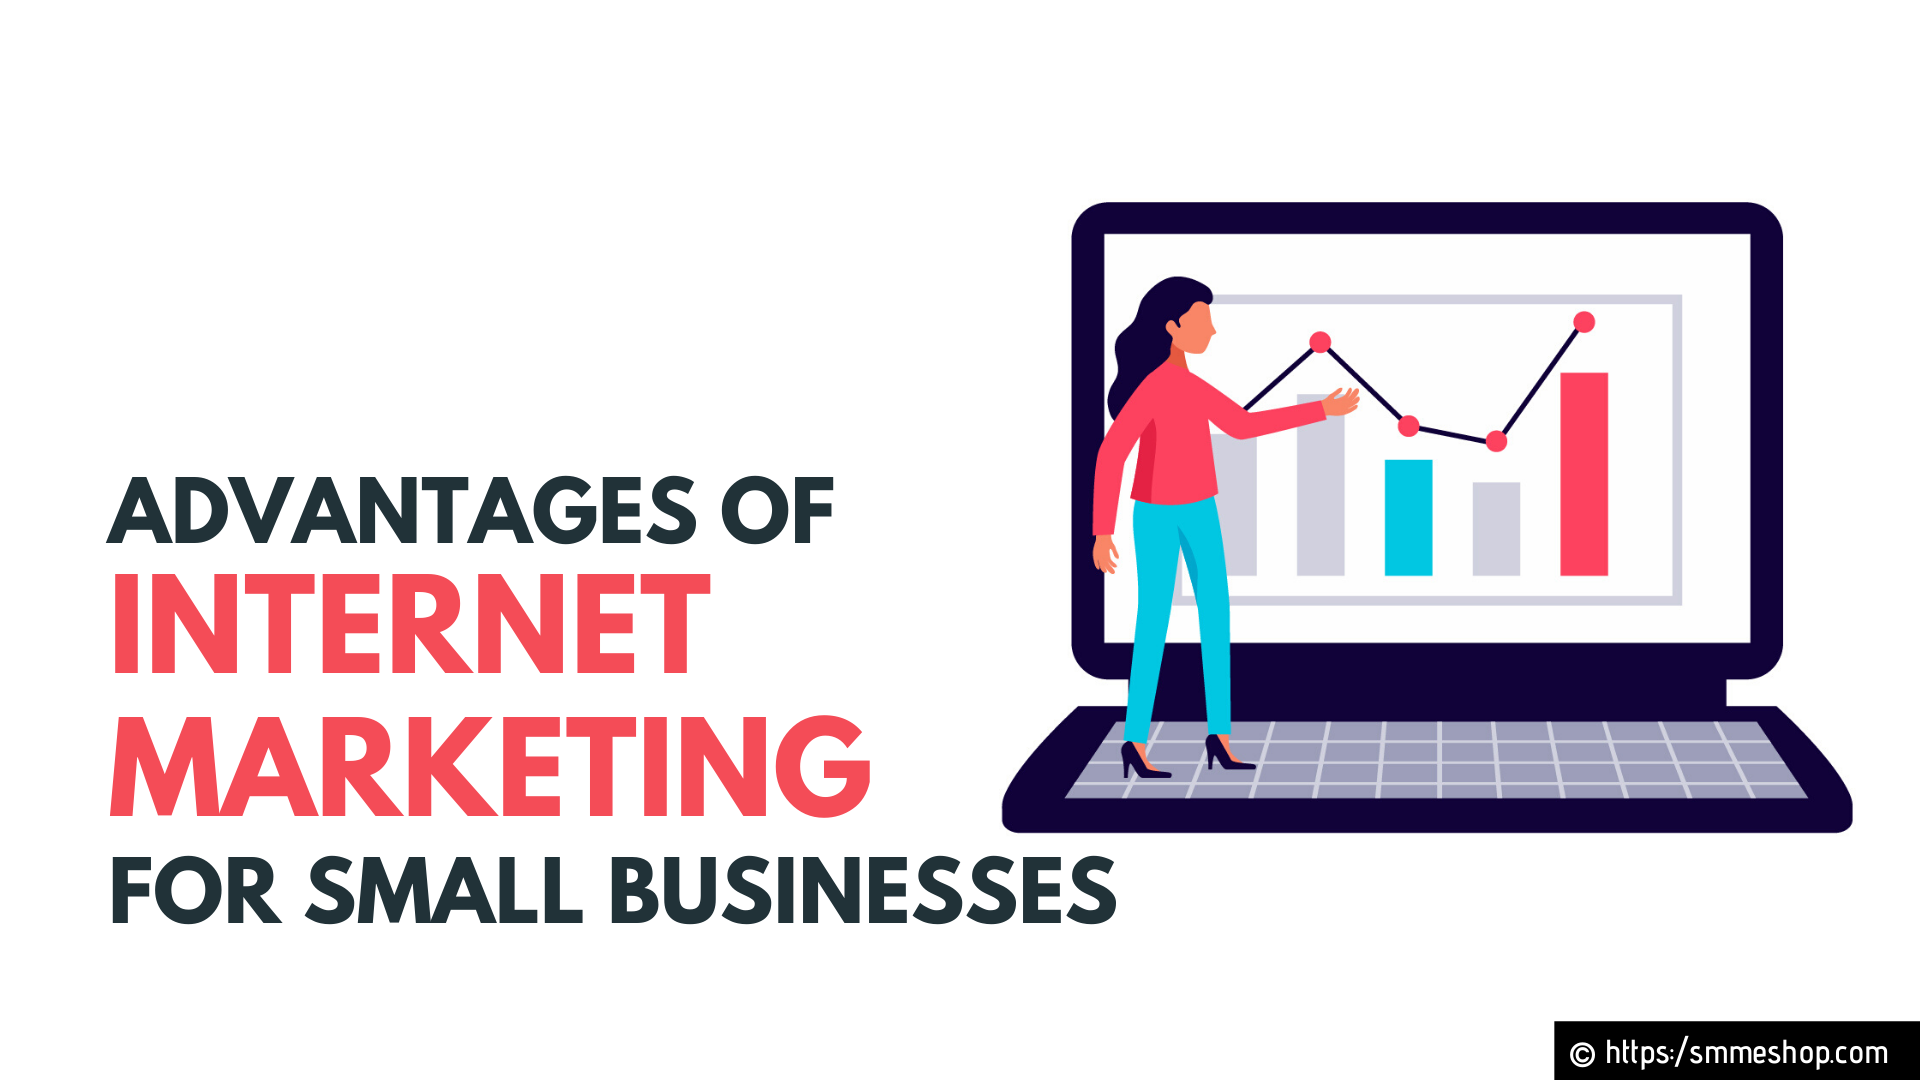 Advantages of Internet Marketing for Small Businesses